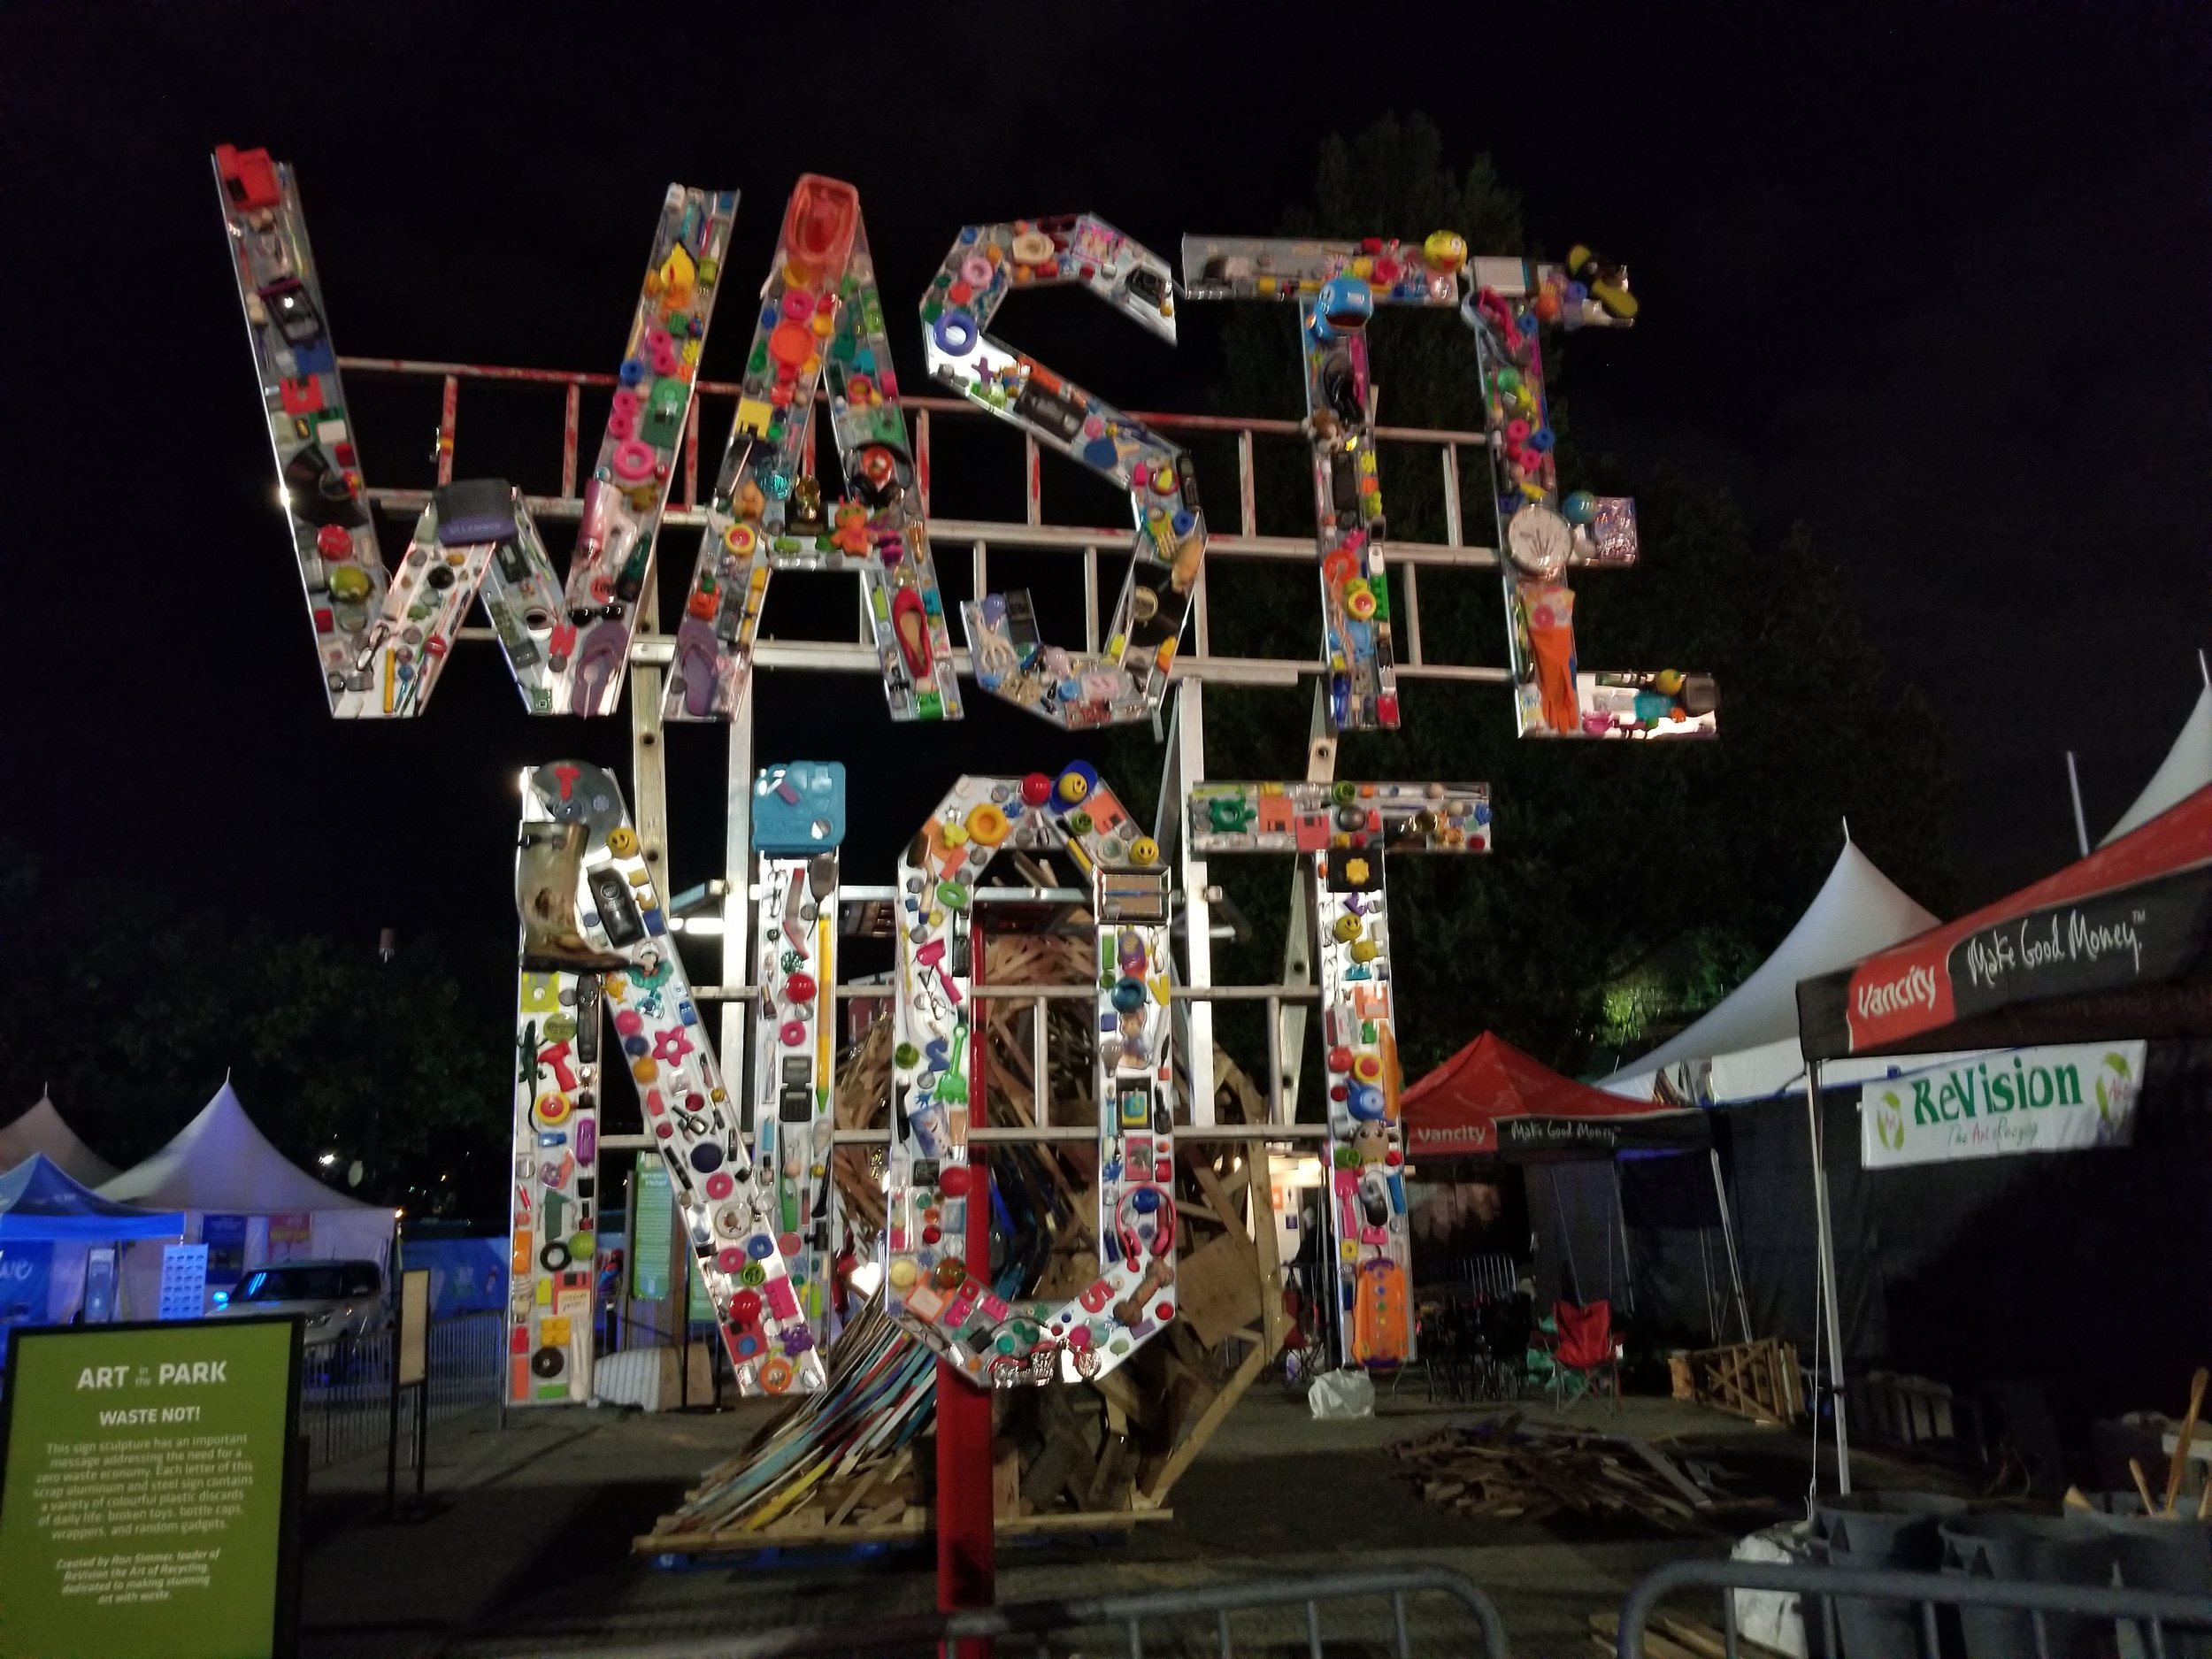 "Waste Not" sign at night